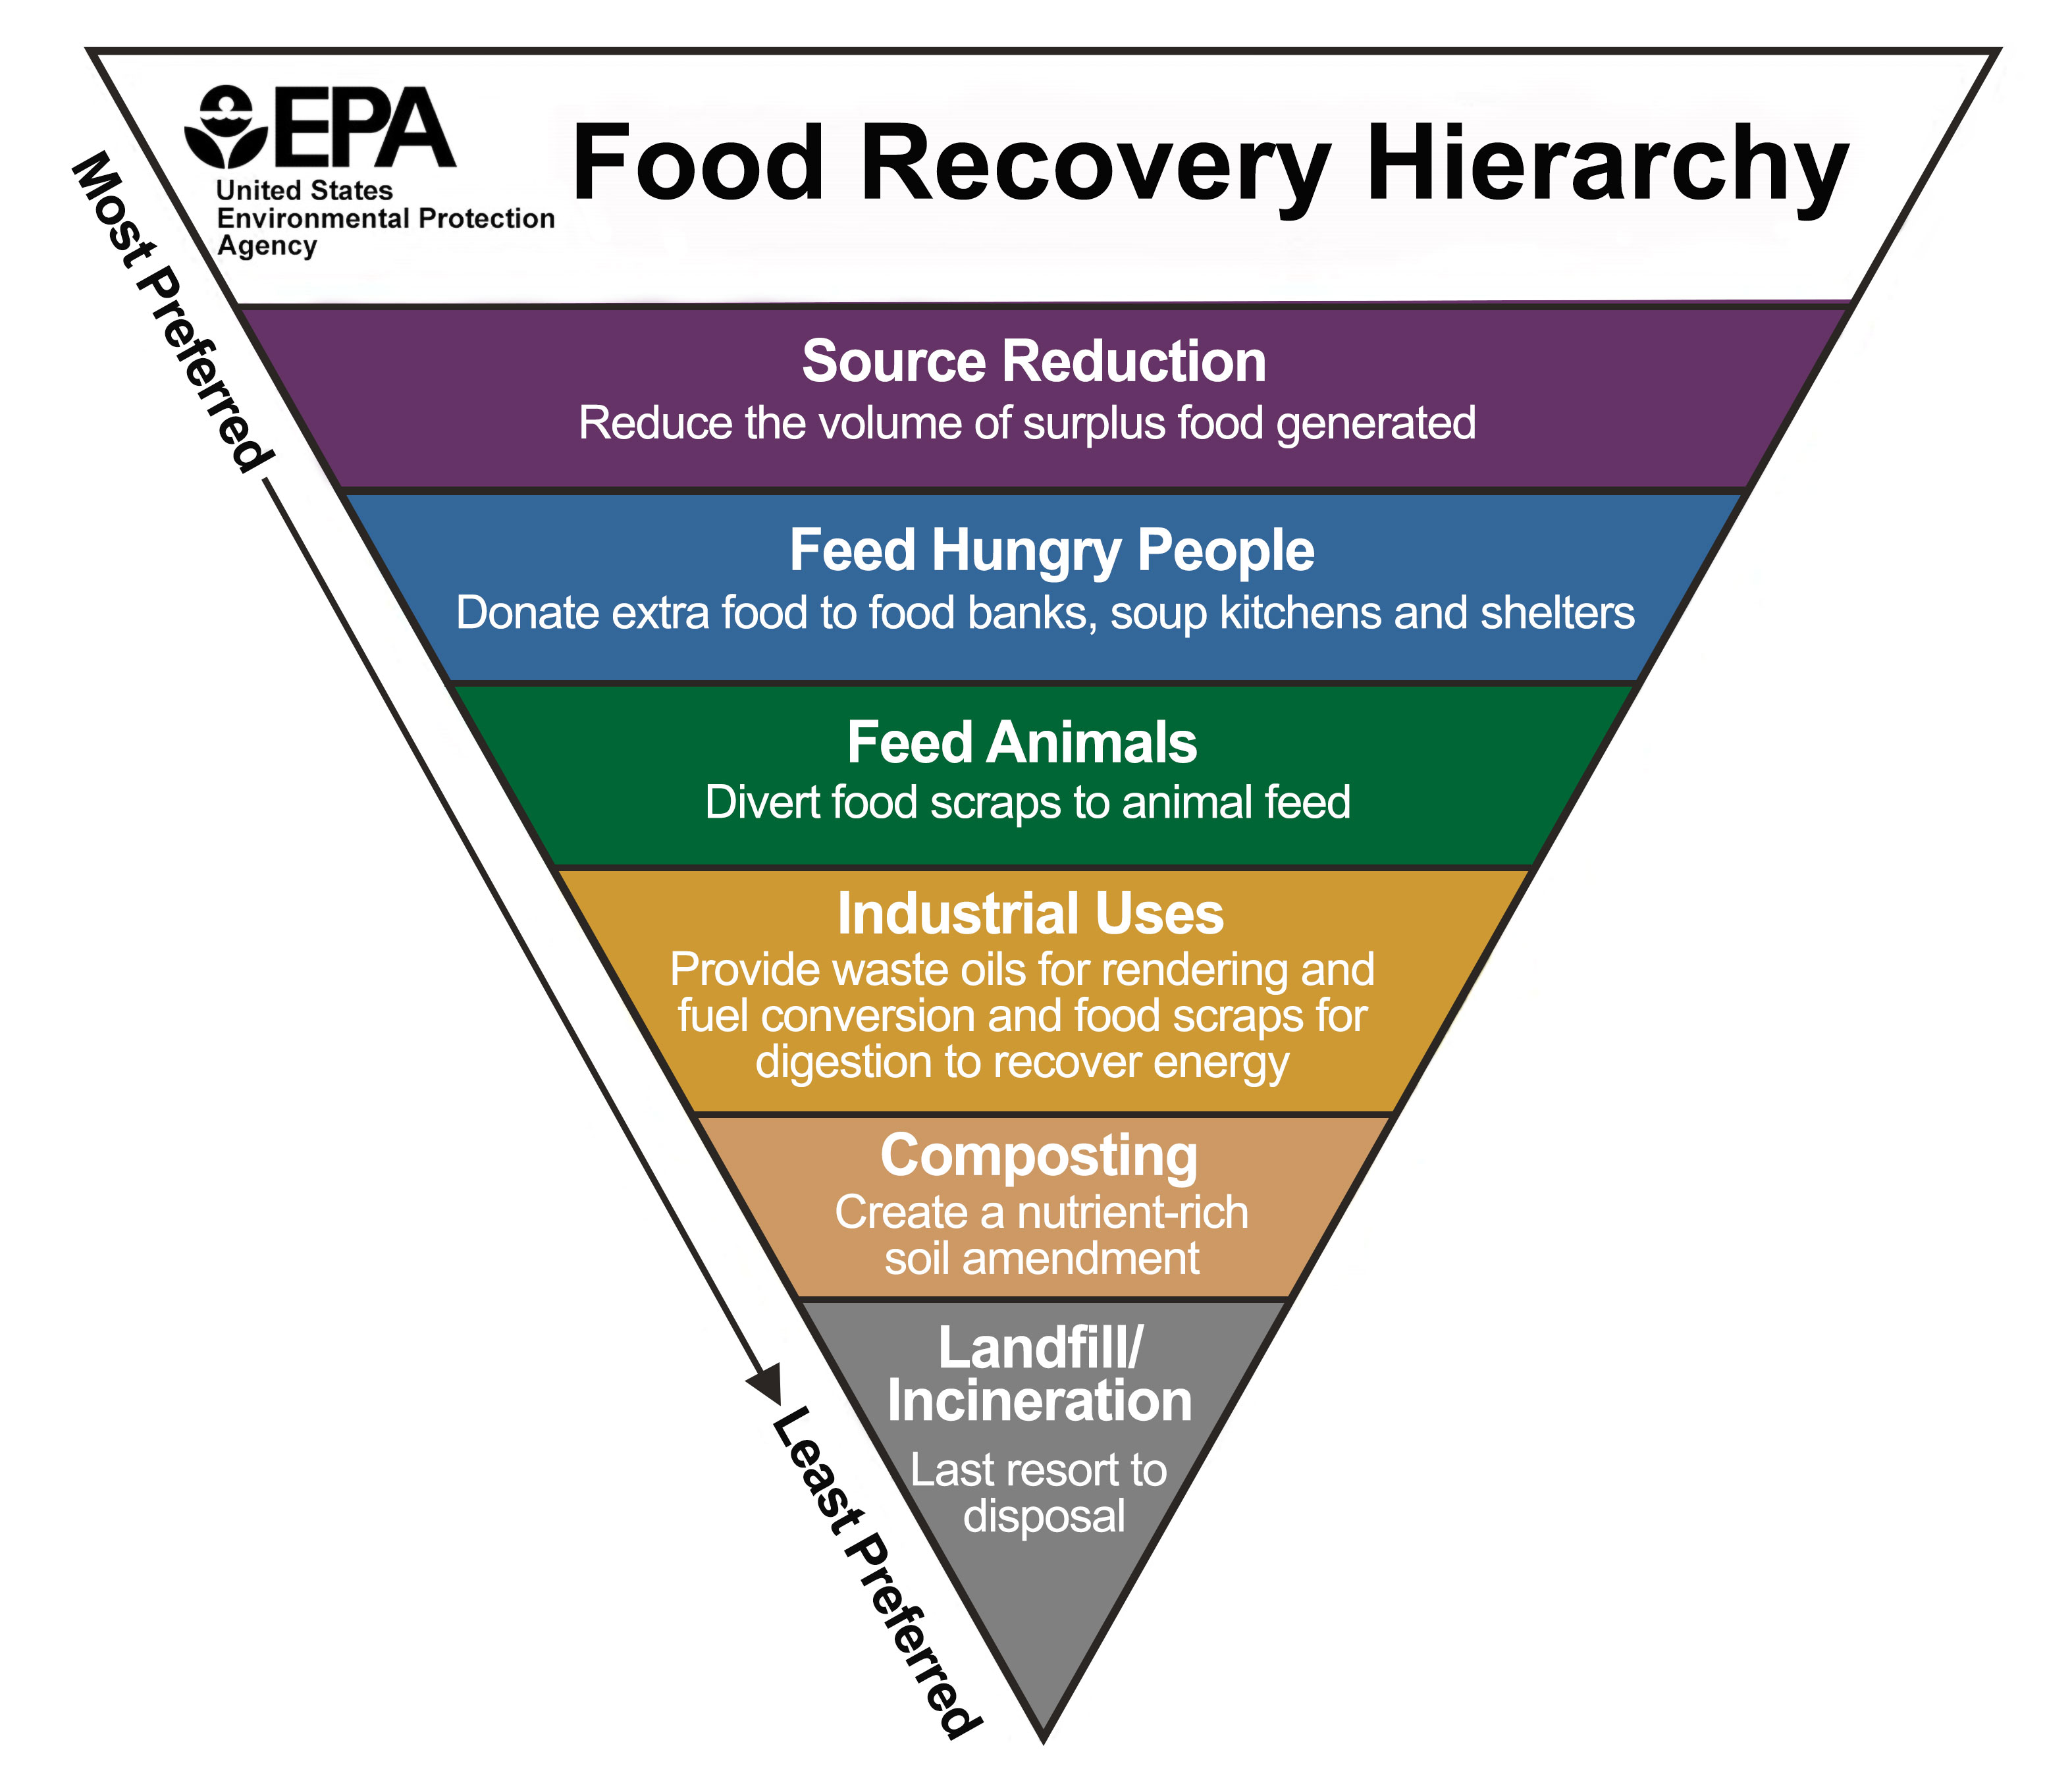 Diagram of the E.P.A. Food Recovery Hierarchy. An upside down pyramid divided into 6 sections ranked from most preferred to least preferred food recovery methods. From the top: Source Reduction, Feed Hungry People, Feed Animals, Industrial Uses, Composting, and Landfill/ Incineration.